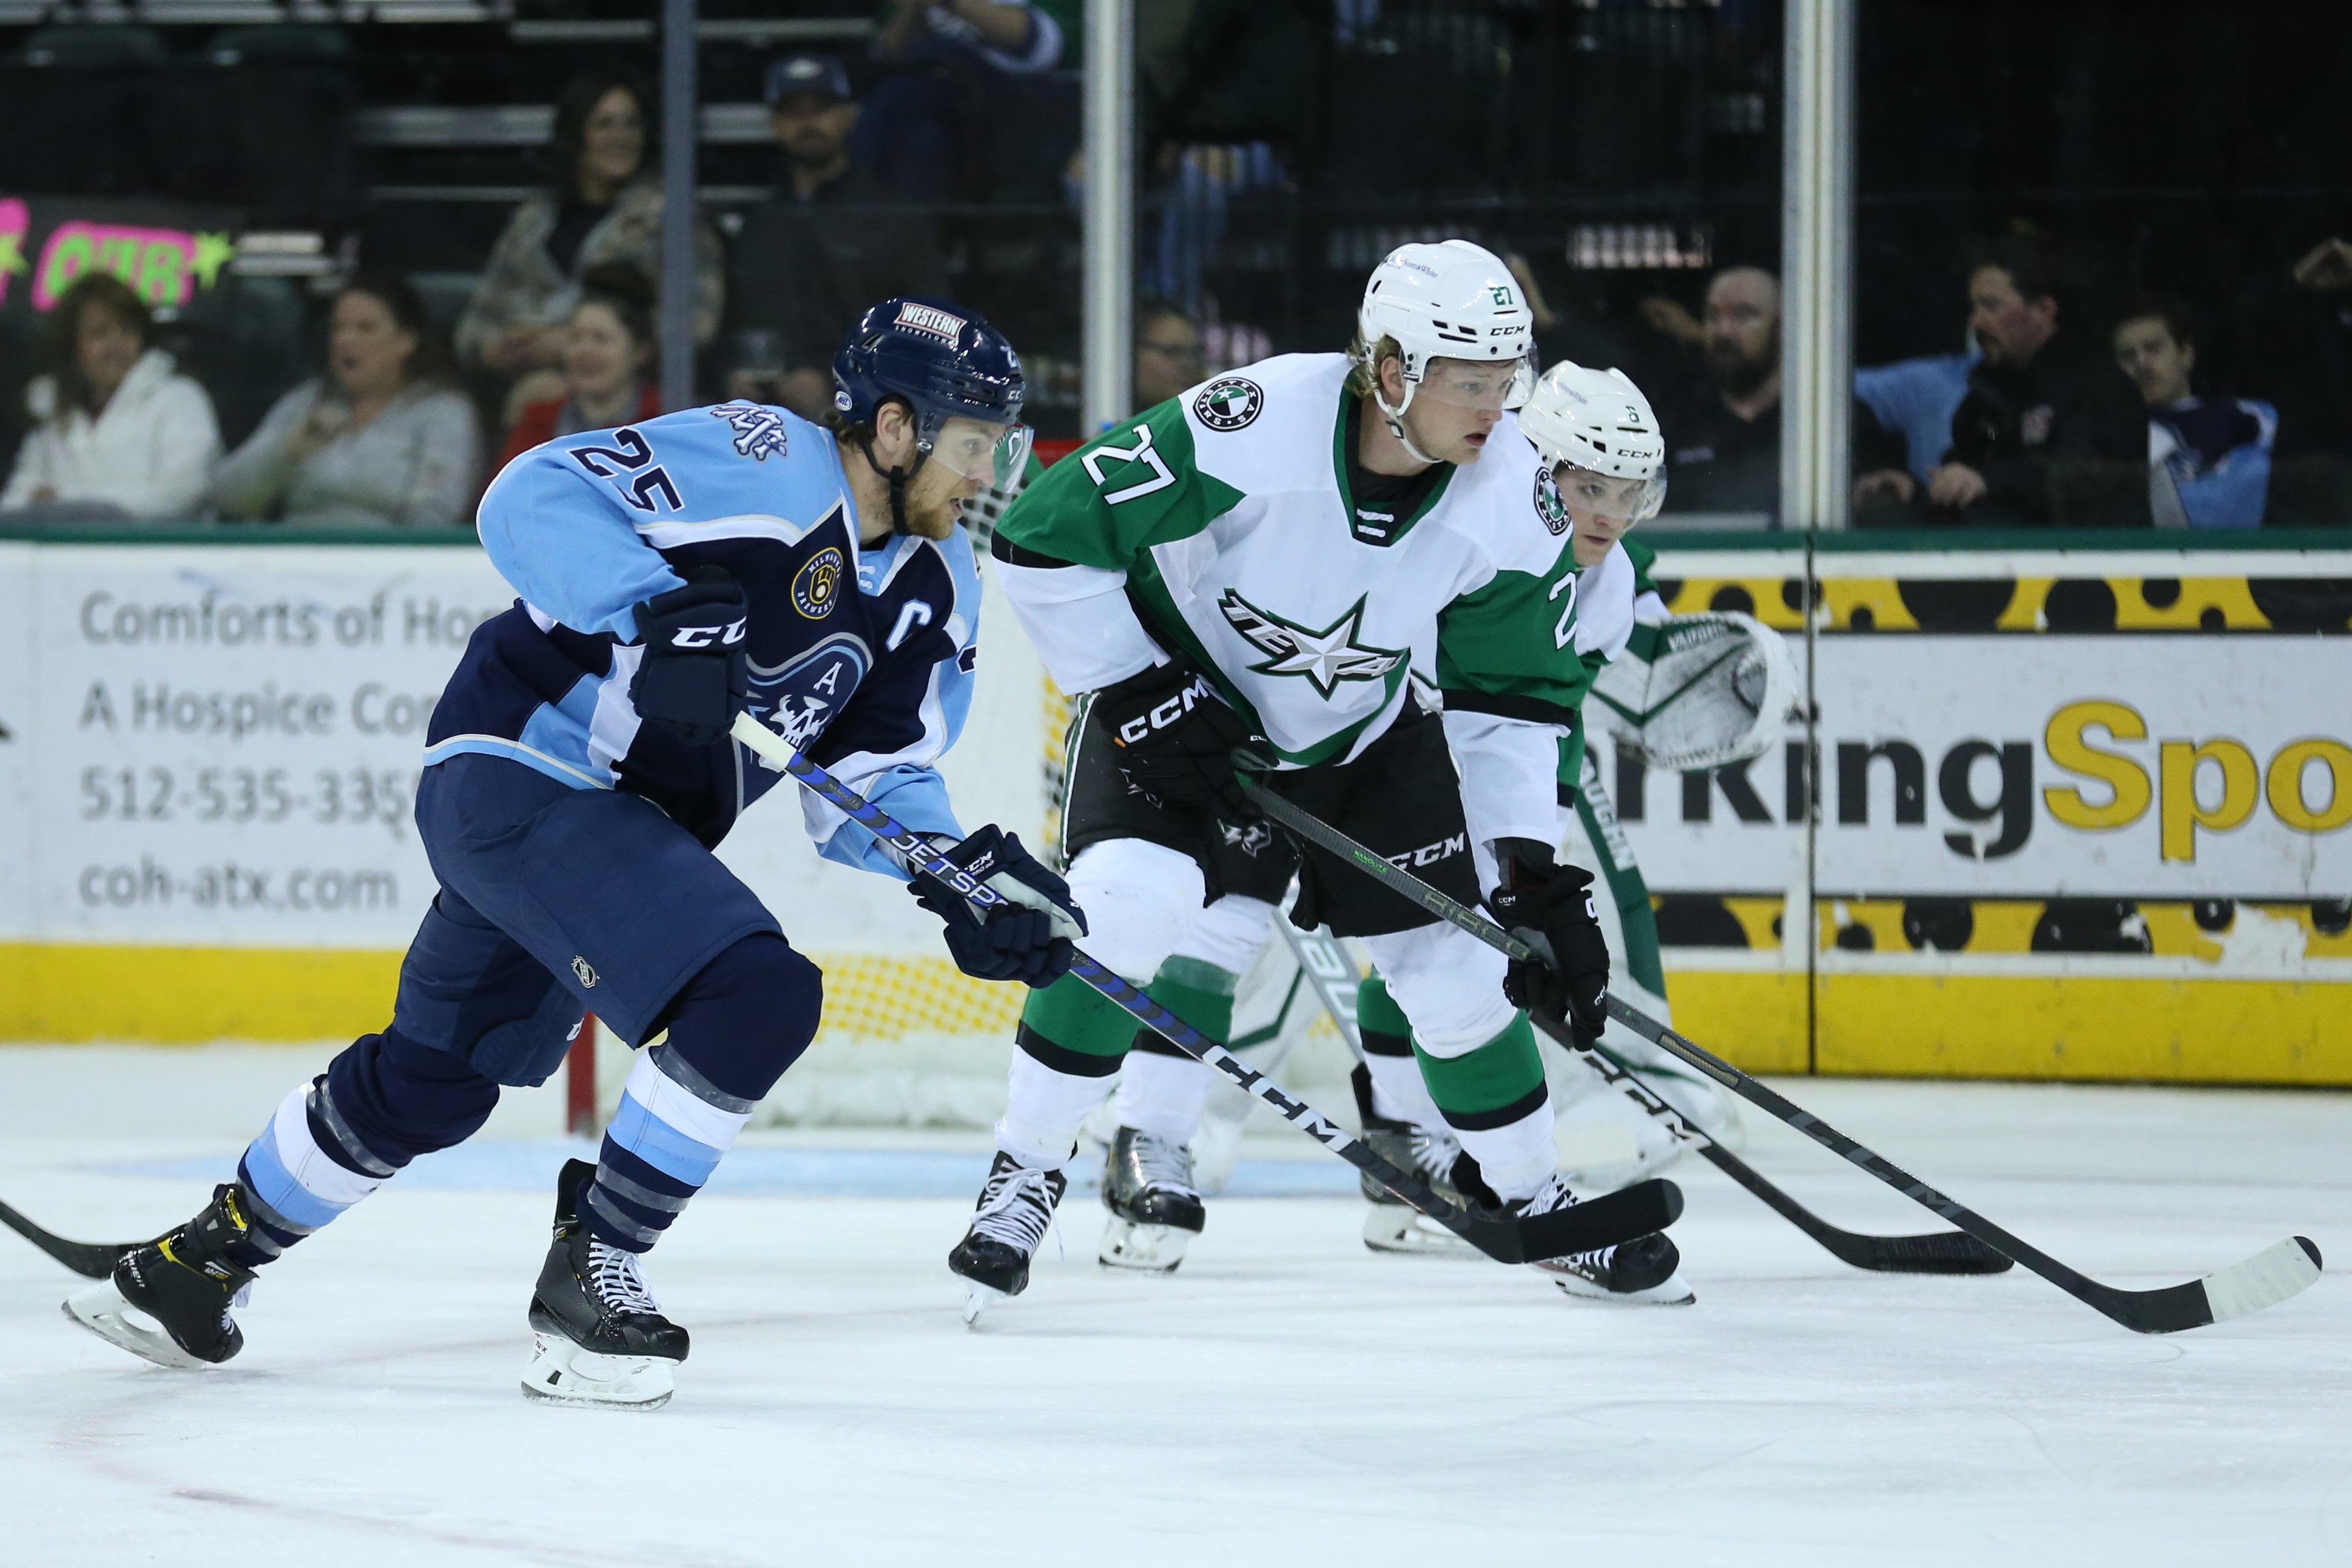 Gameday Preview: Texas Stars v. Milwaukee Admirals